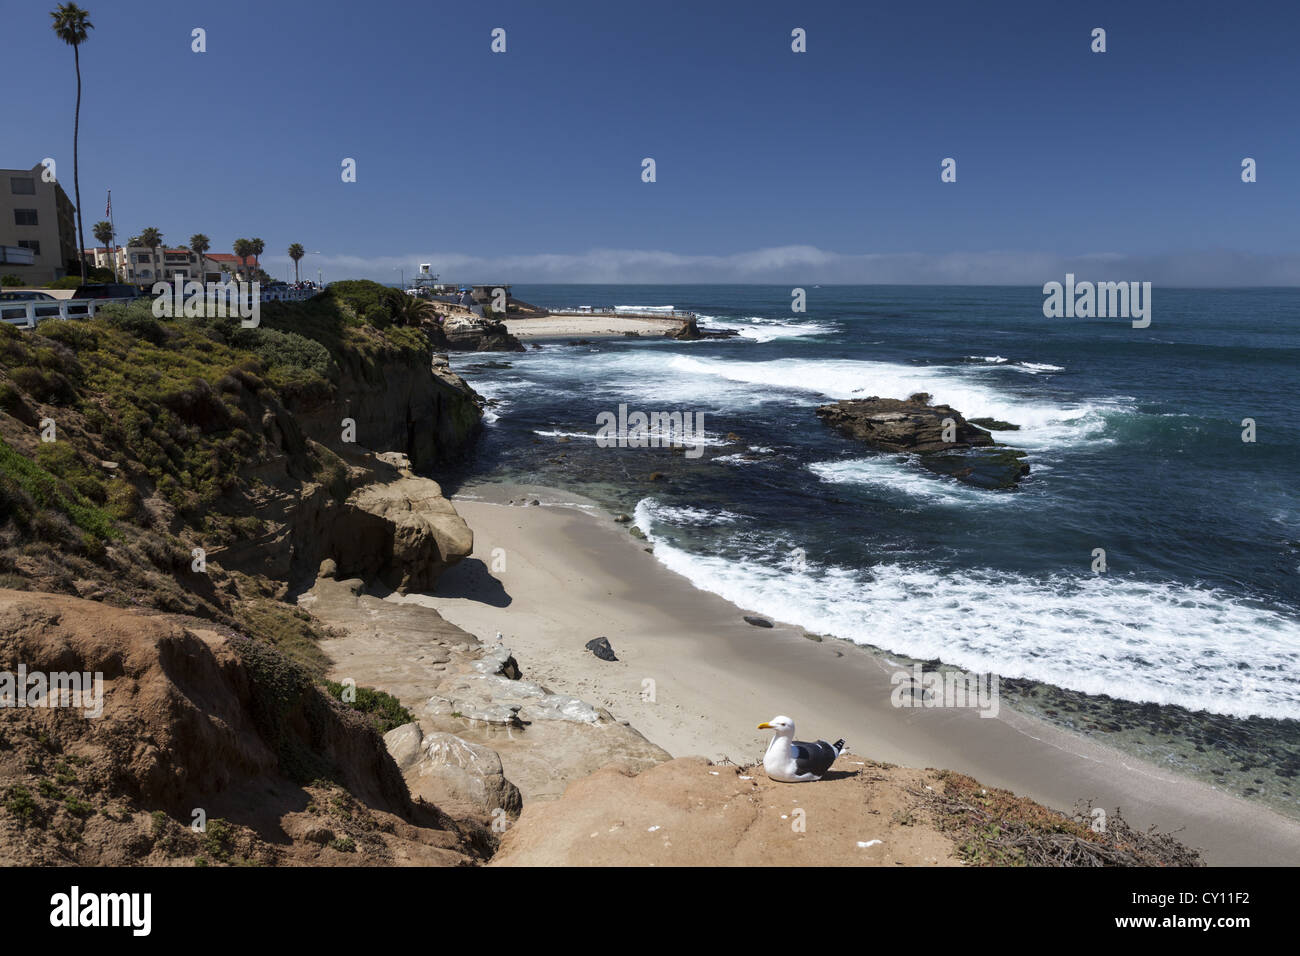 Californian coastline at La Jolla, Southern California looking to the Childrens Pool. Stock Photo